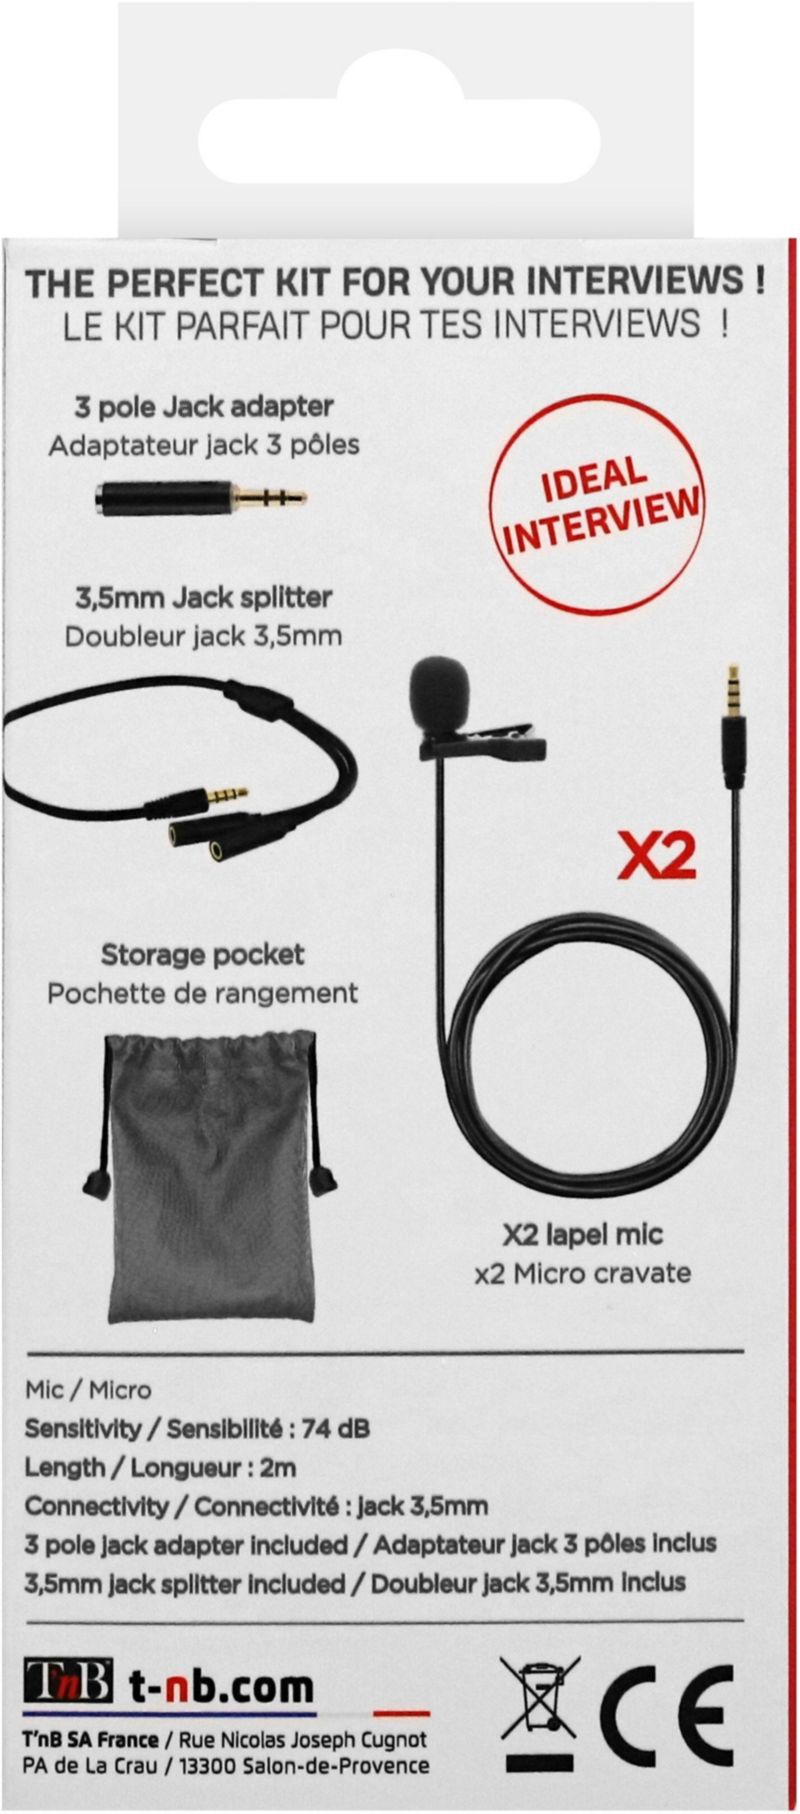 Microphone for smartphone / camera - INFLUENCE - T'nB